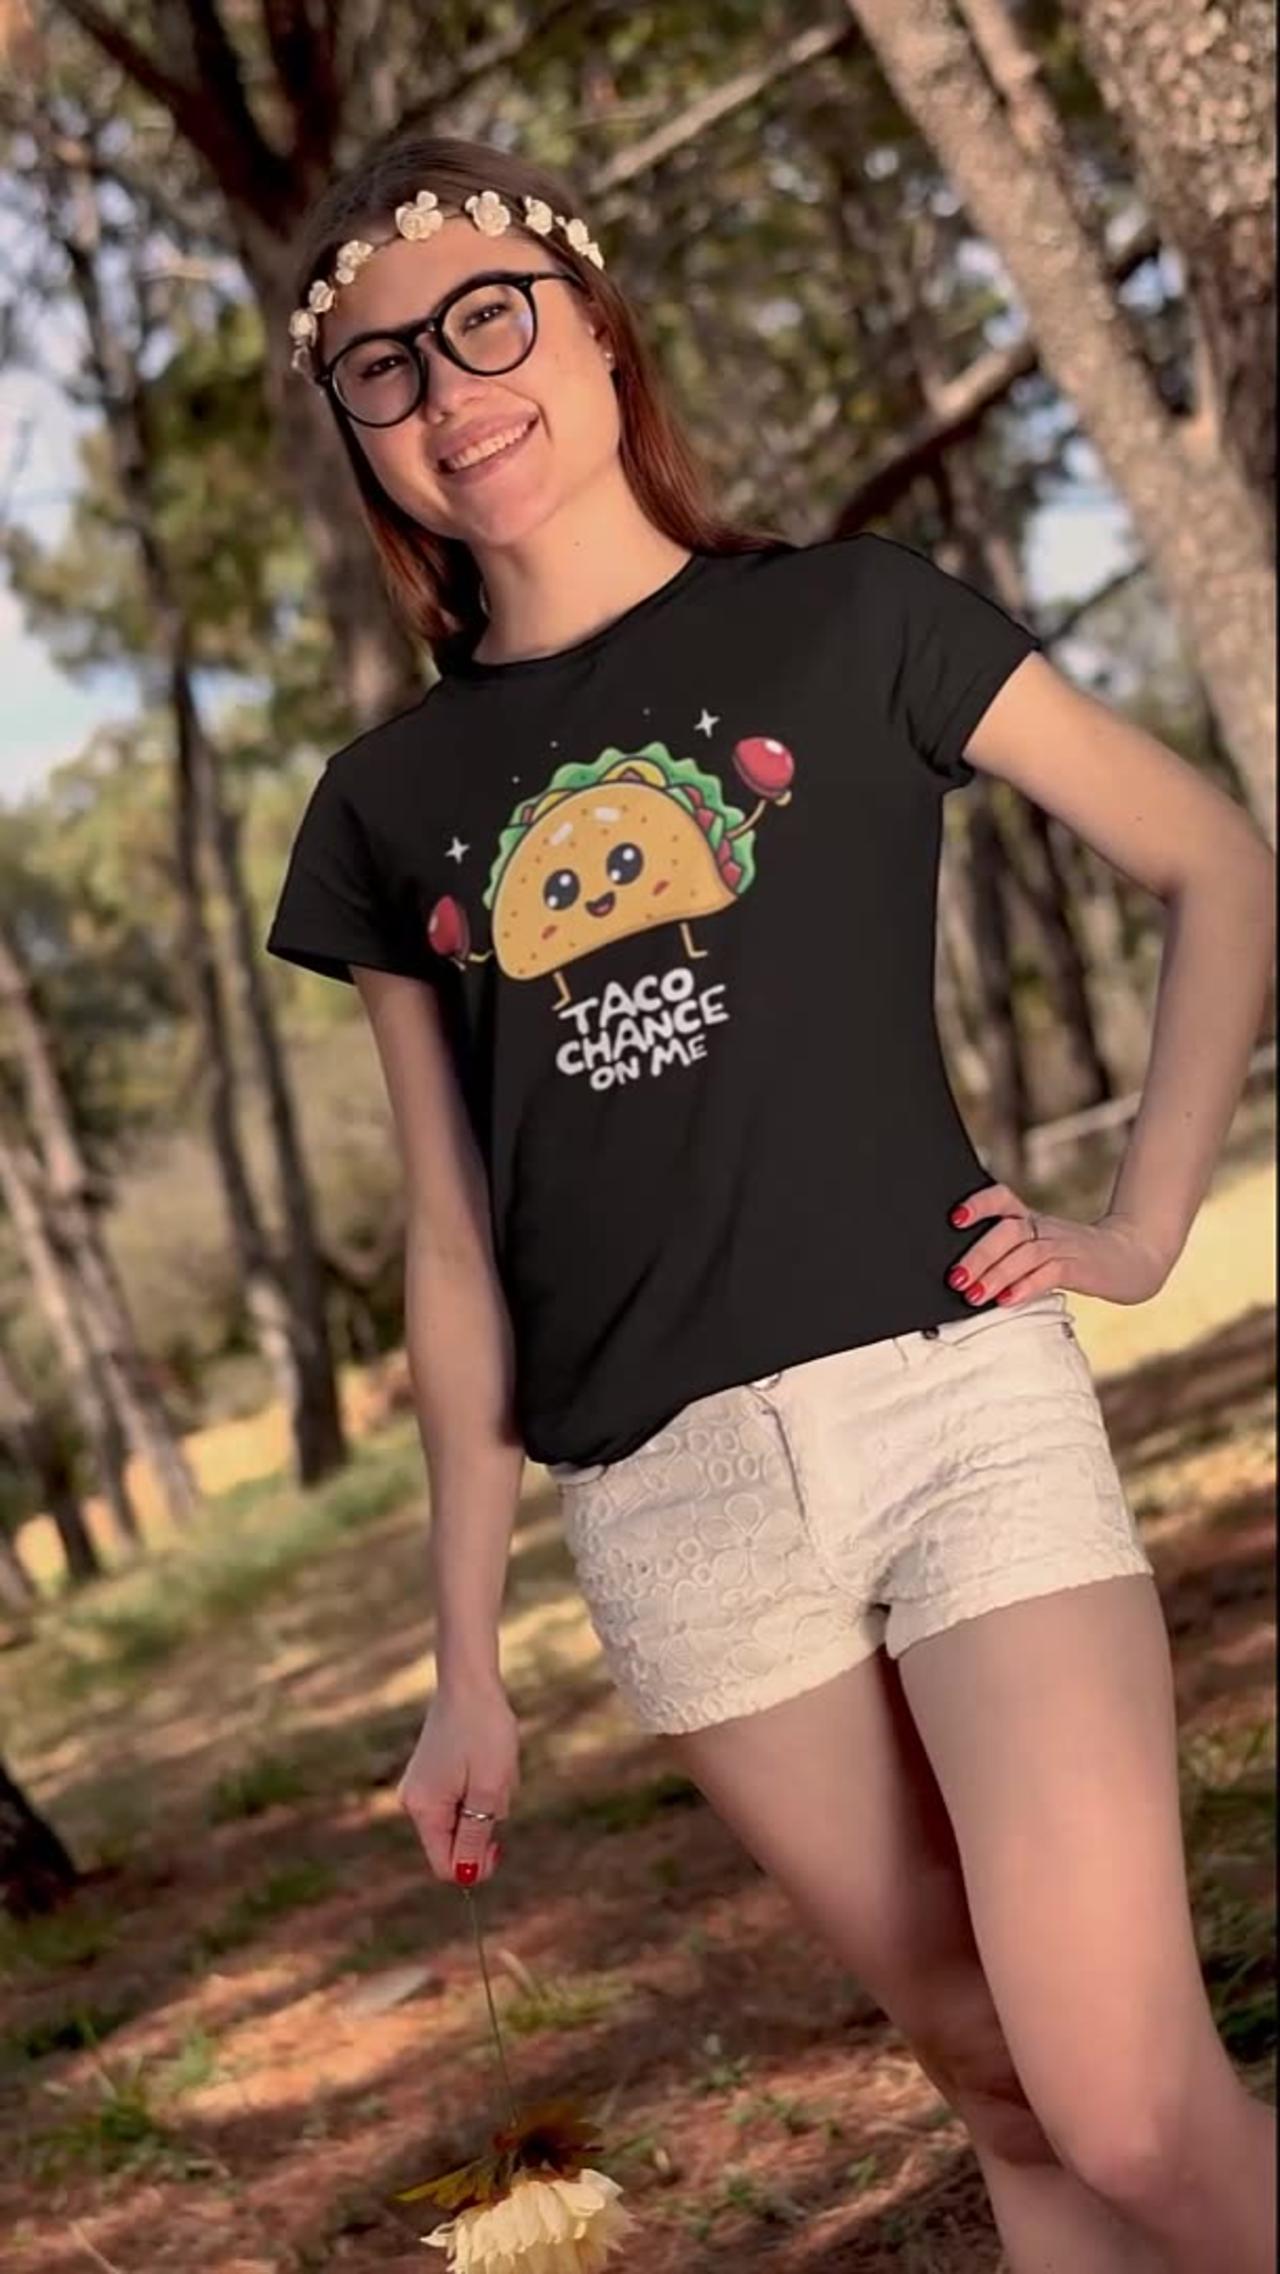 Why Everyone's Talking About This Taco Tee? #TacoTee #FoodieFashion #QuirkyTShirts #TacoTuesday